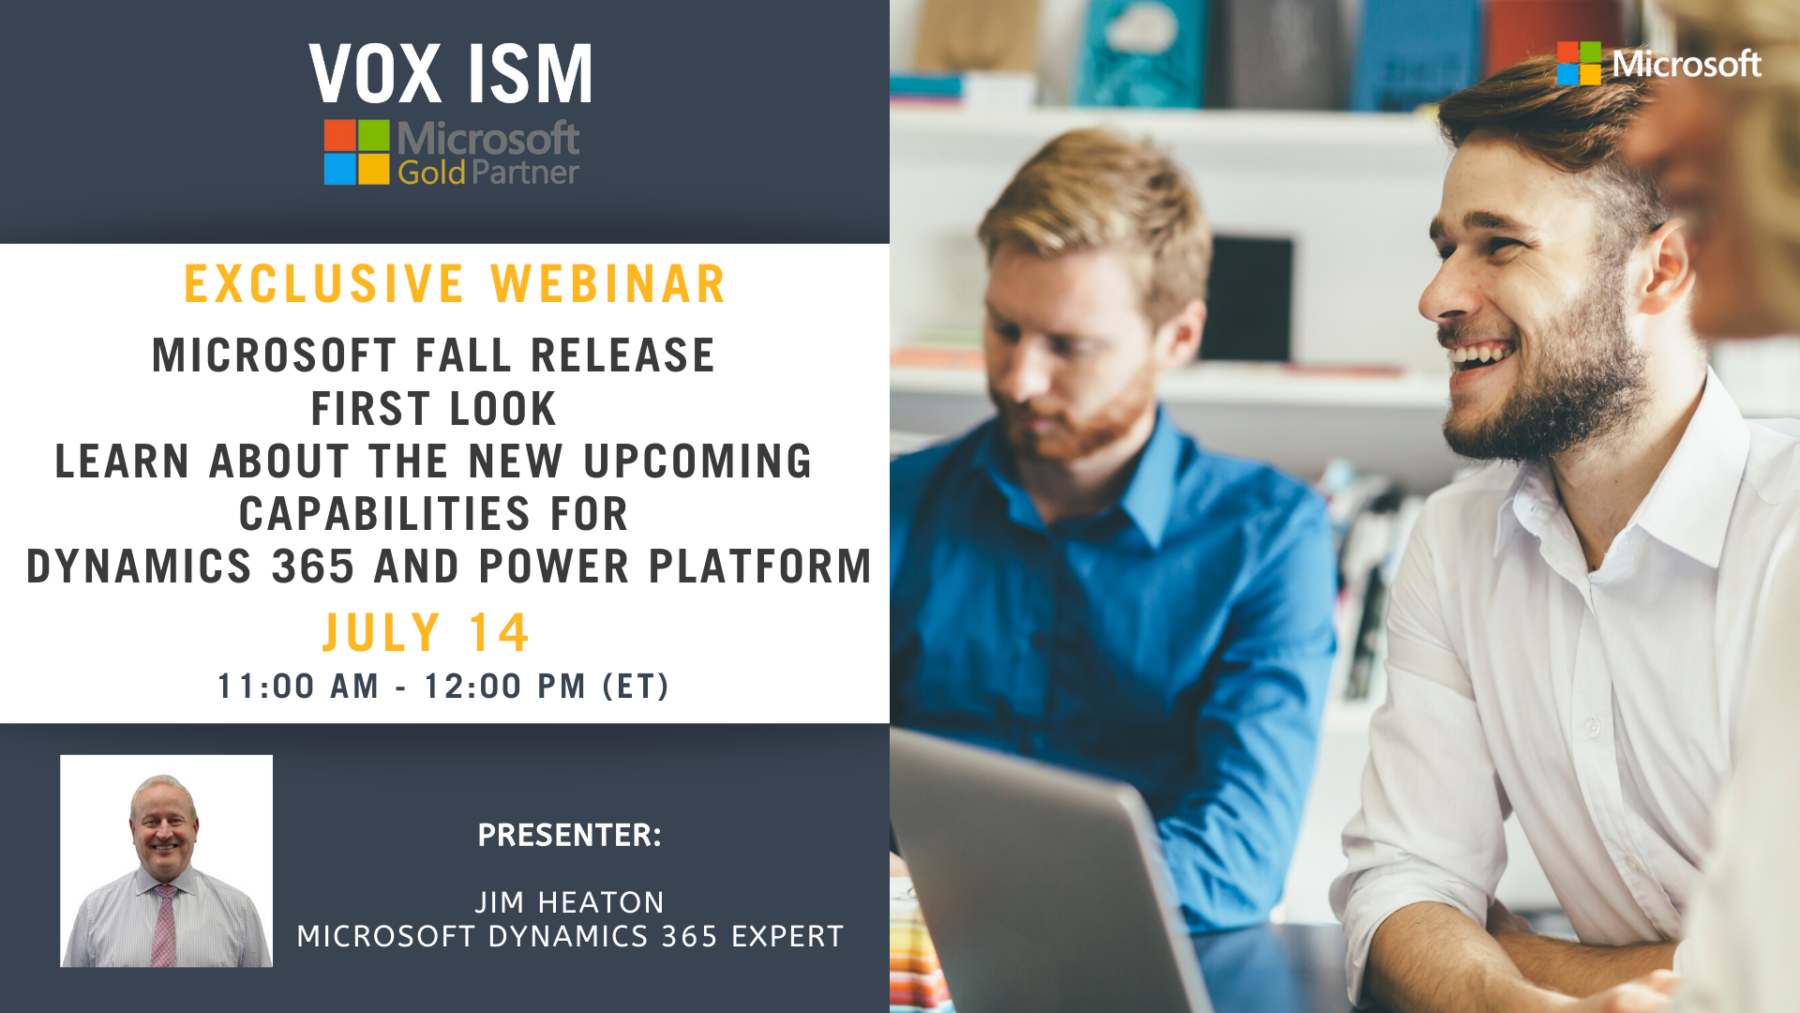 Microsoft Fall Release - First Look - Learn about the new upcoming capabilities for Dynamics 365 and Power Platform - July 14 - Webinar VOX ISM